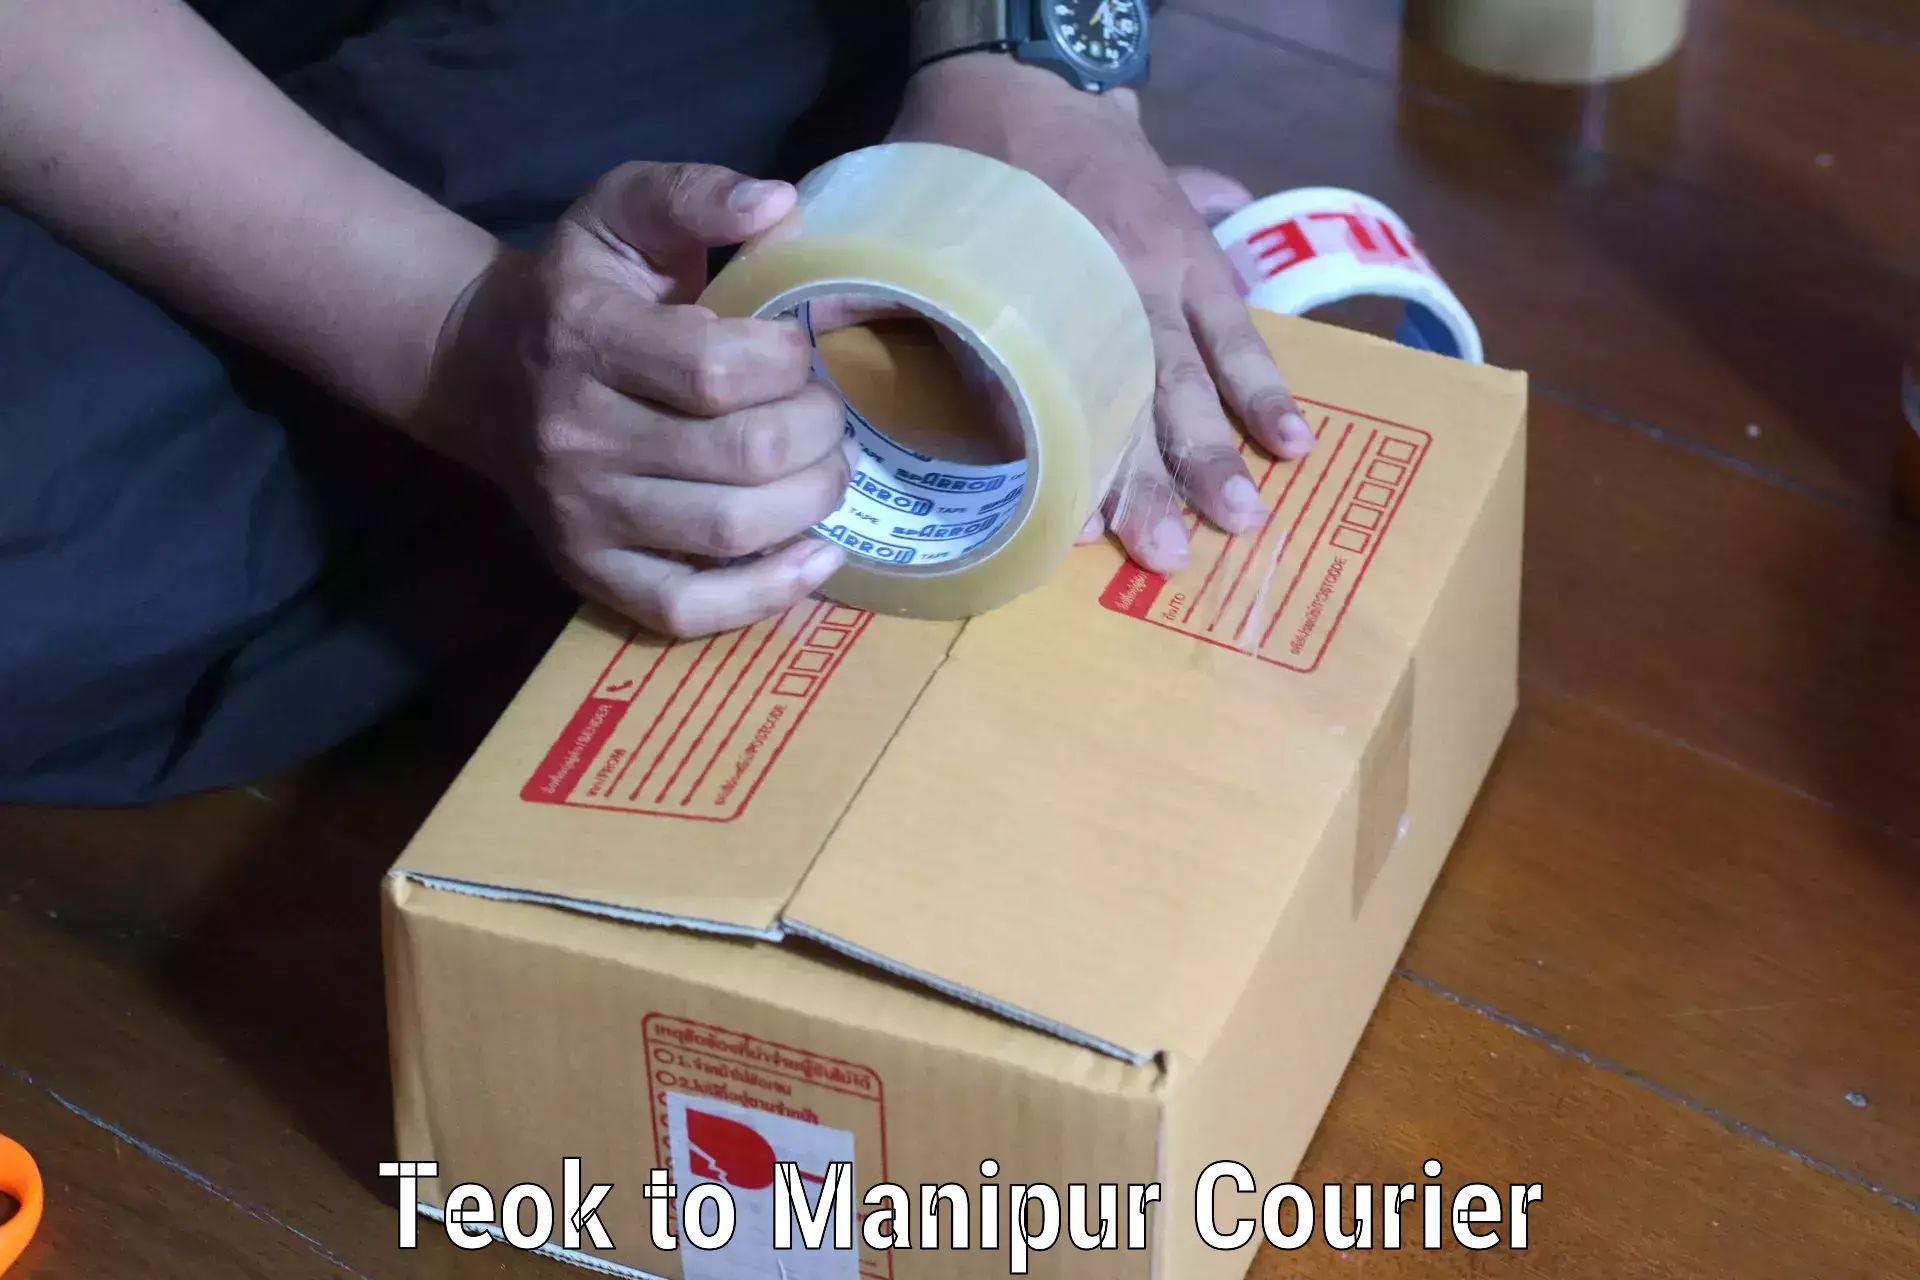 On-call courier service Teok to Manipur